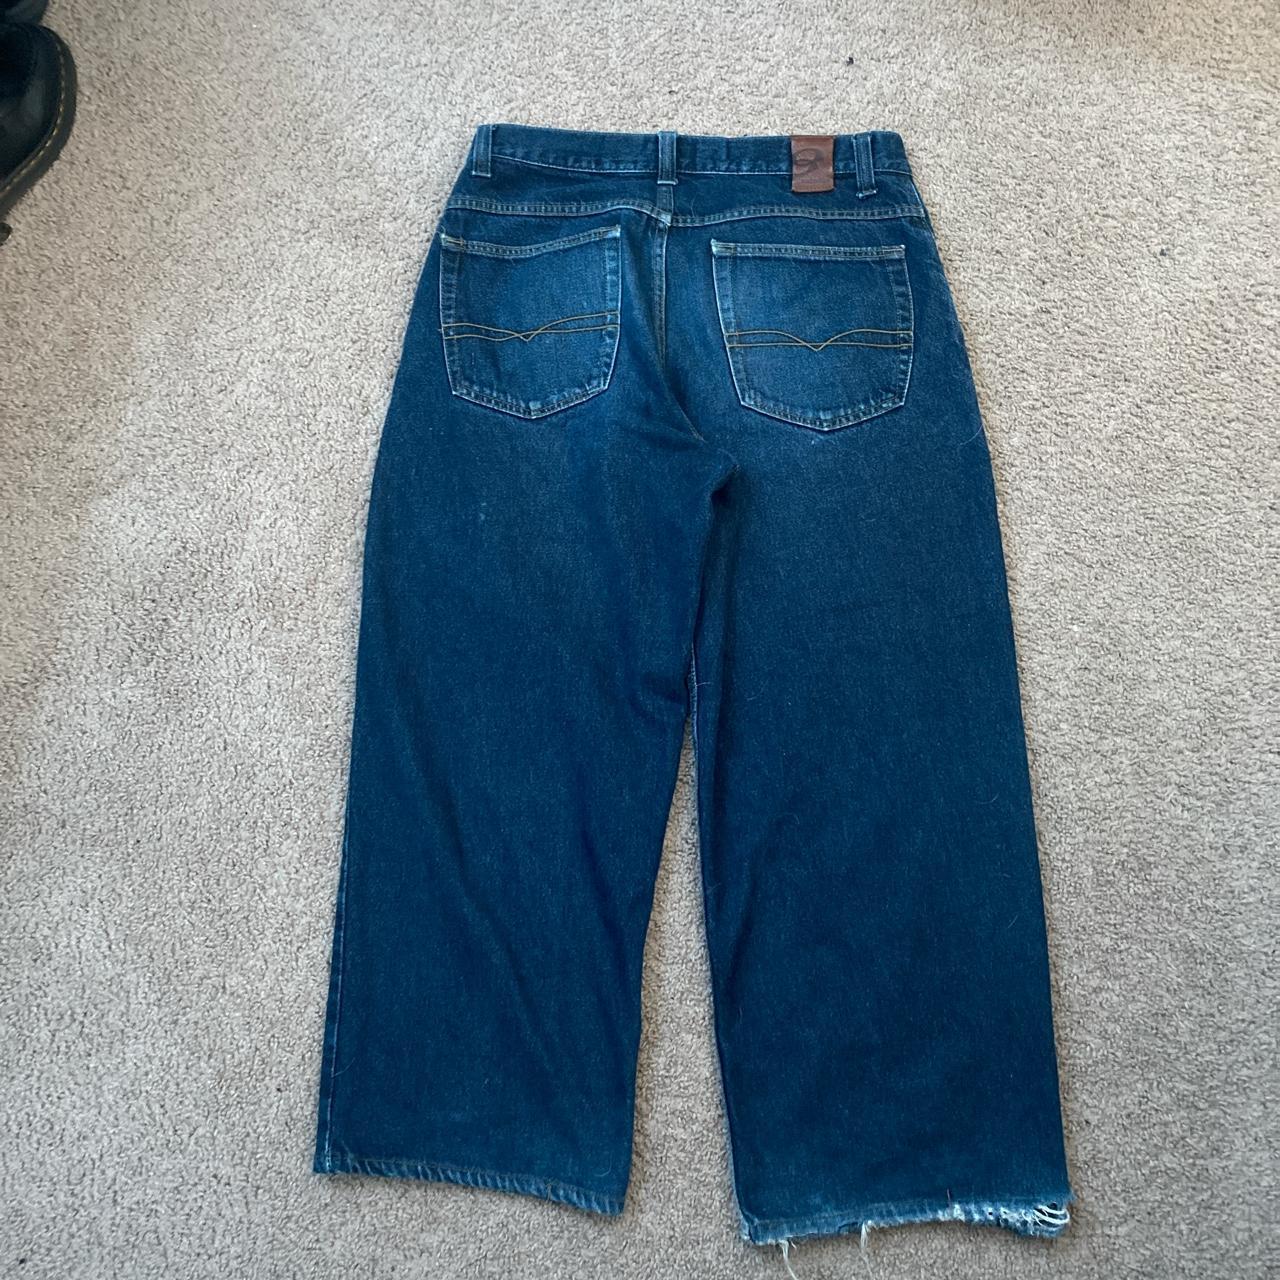 Anchor Blue Men's Navy and Blue Jeans (2)